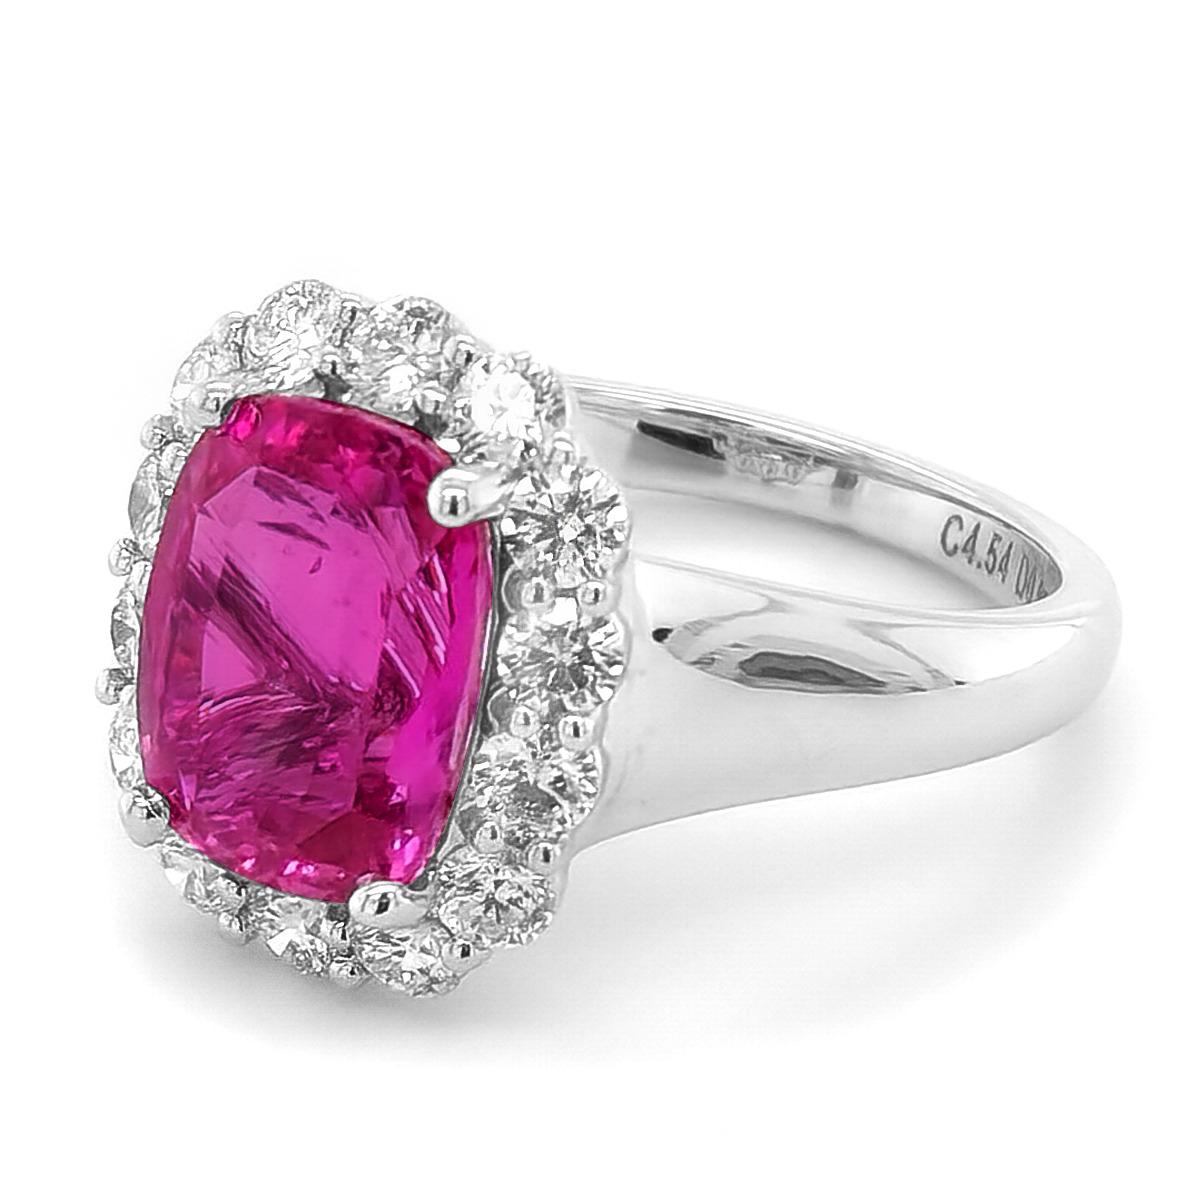 Romantic GIA Certified 4.54 Carat Madagascar Pink Sapphire Diamond 18k White Gold Ring For Sale